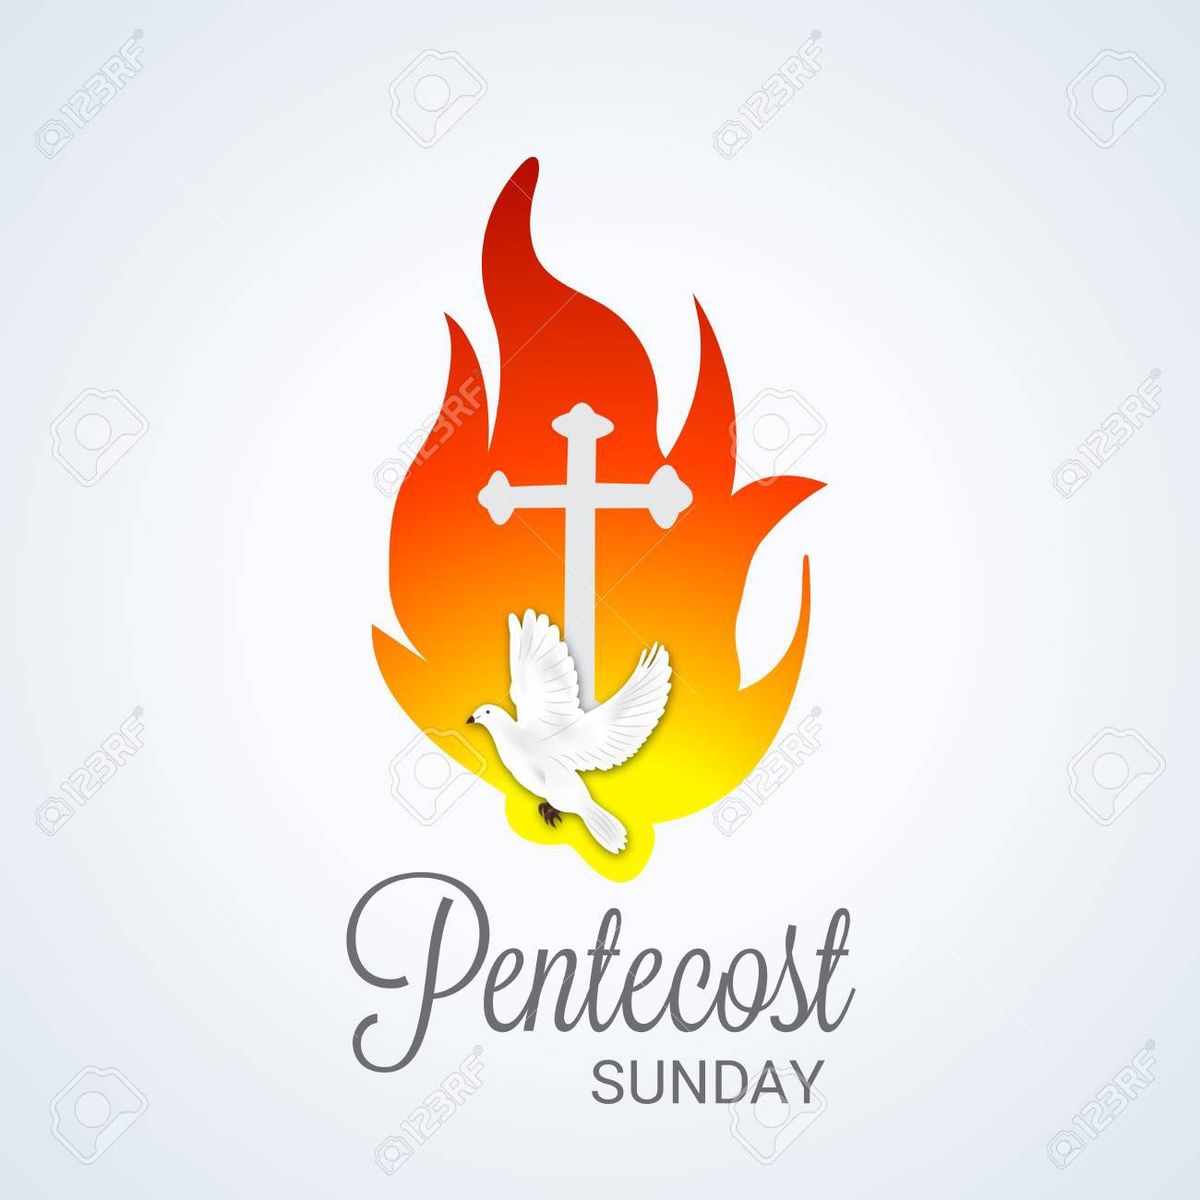 Pentecost - Friends & Family Day